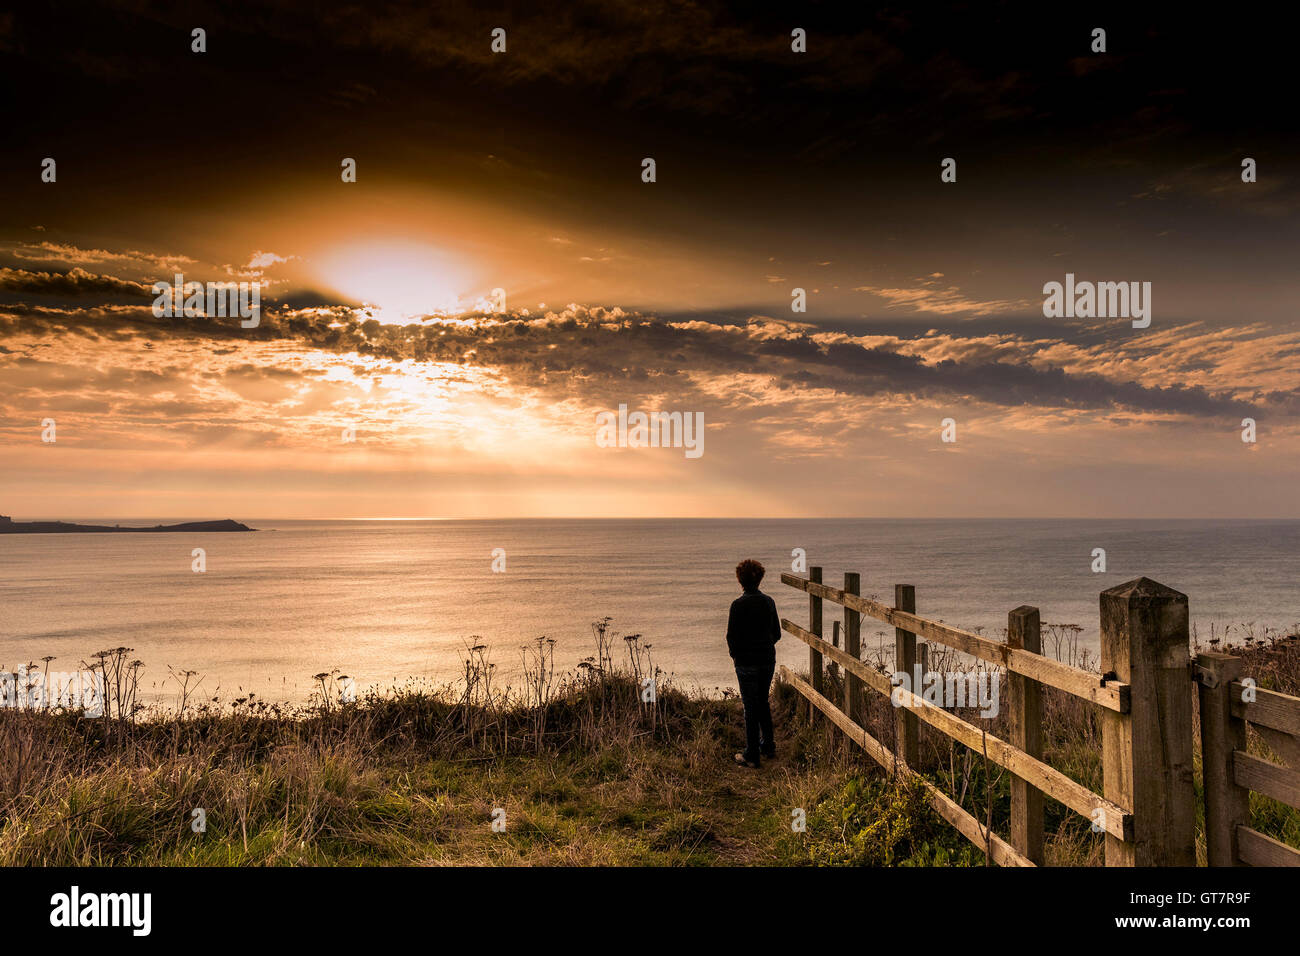 A woman stands on cliffs looking at a stunning sunset breaking over Newquay Bay in Cornwall. Stock Photo